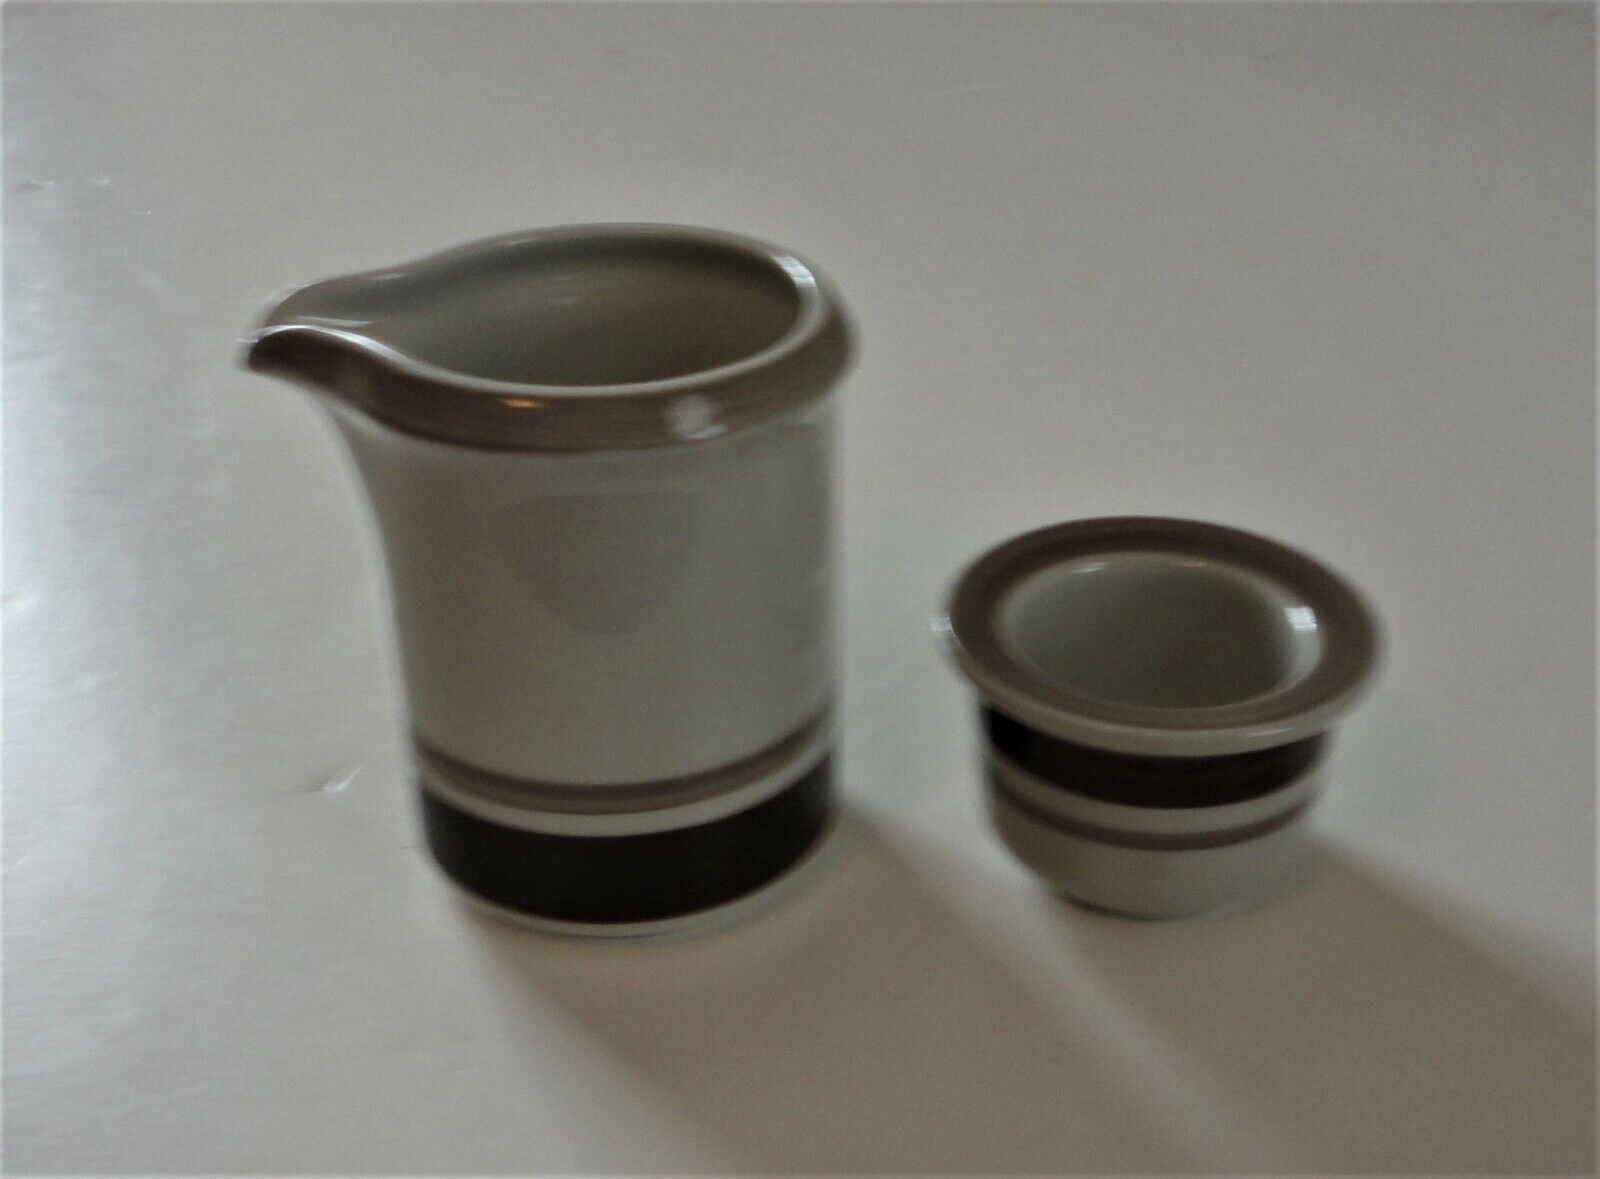 Read more about the article 2 Mint Vtg Midcentury Modern Arabia Finland Pirtti Creamer and Single Egg Cup